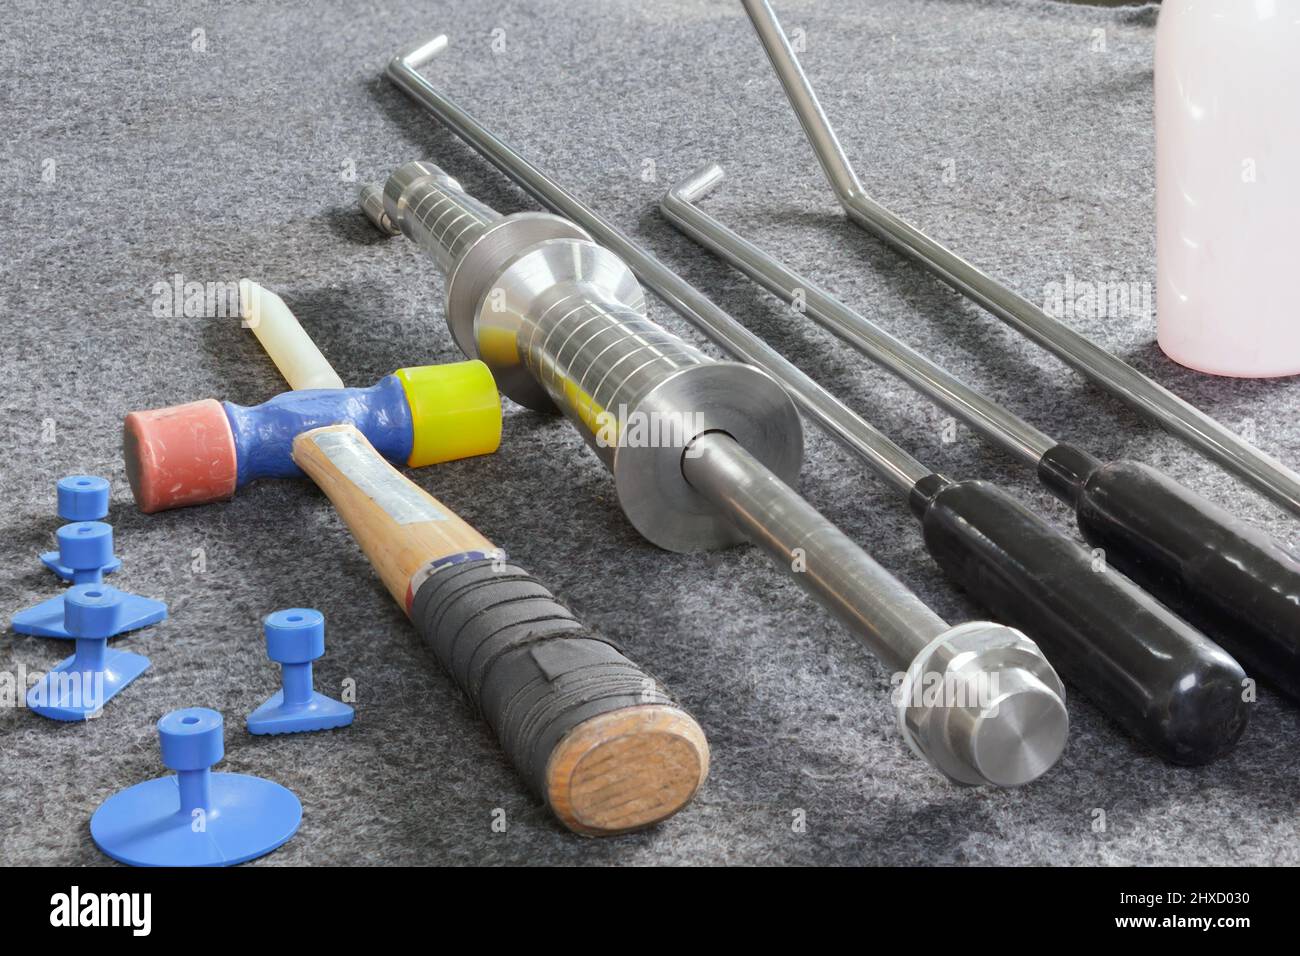 Paintless Dent Repair Kit Tools Set On The Work Table. Stock Photo